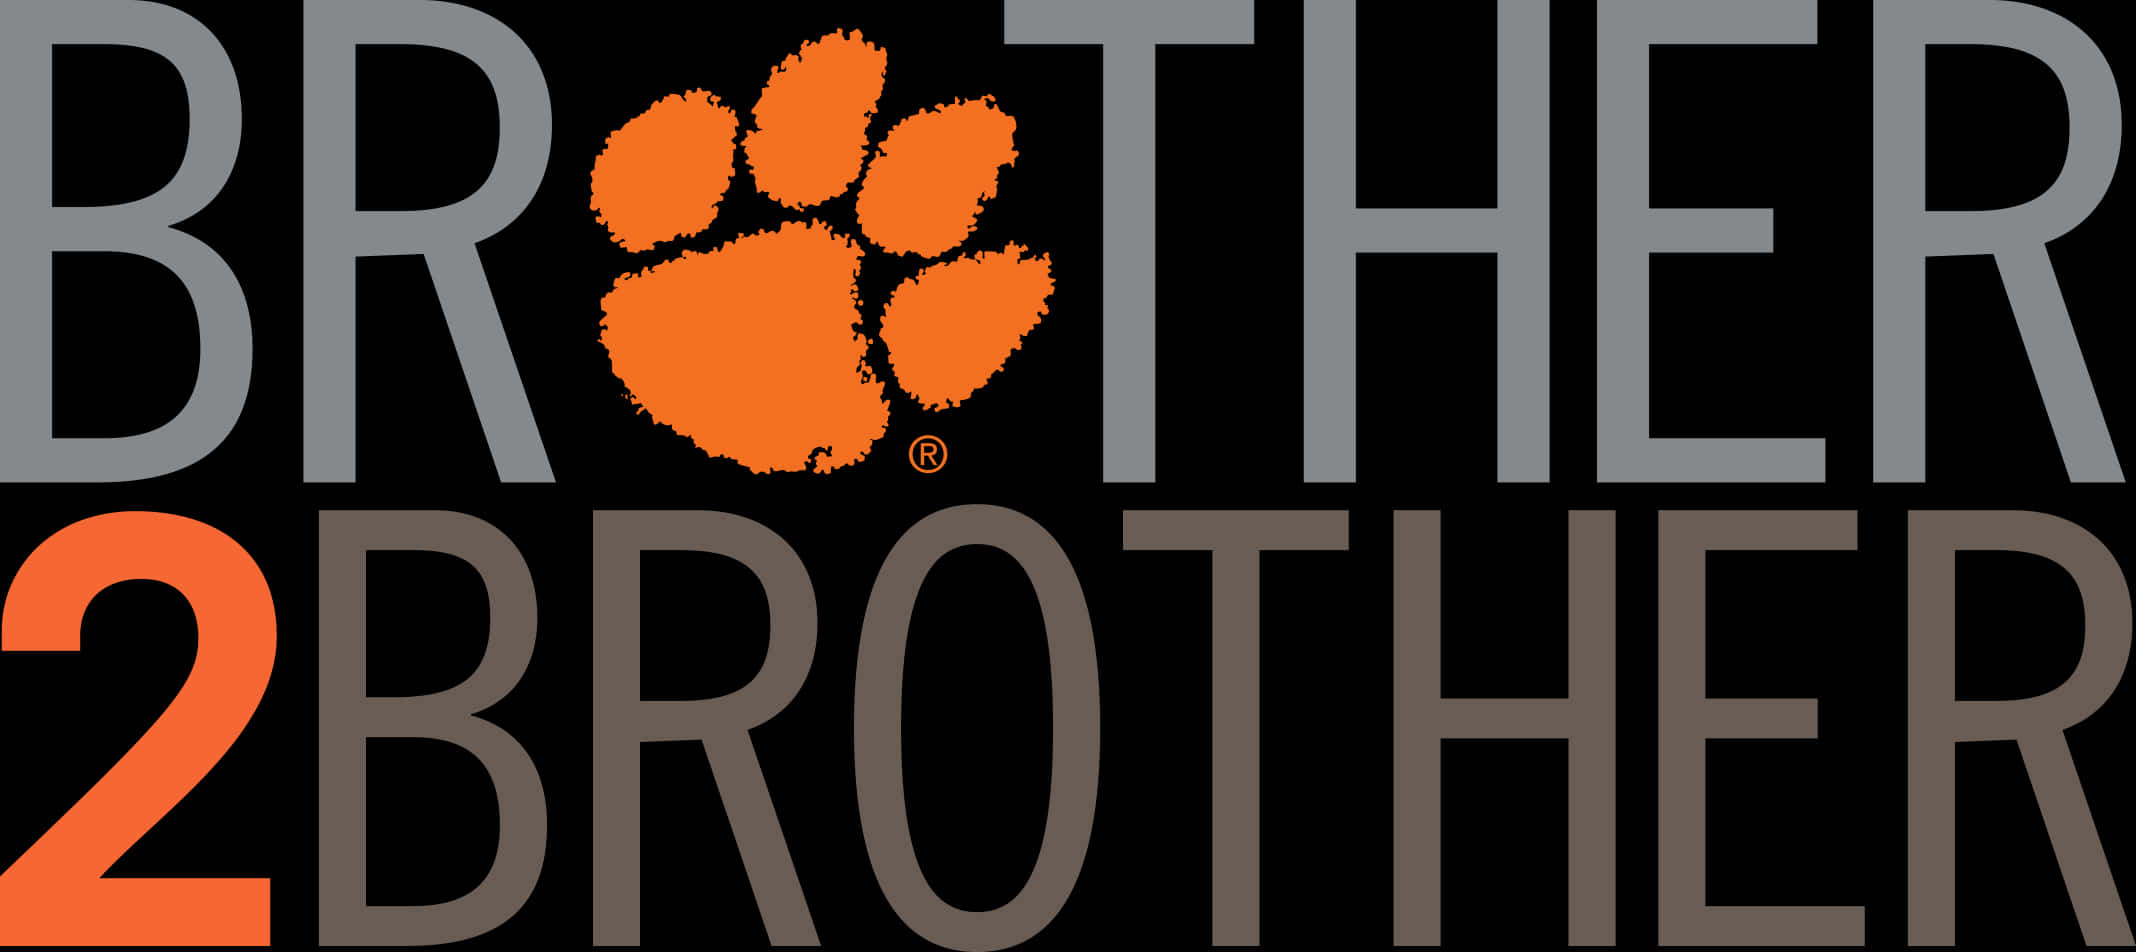 A Logo With A Paw Print